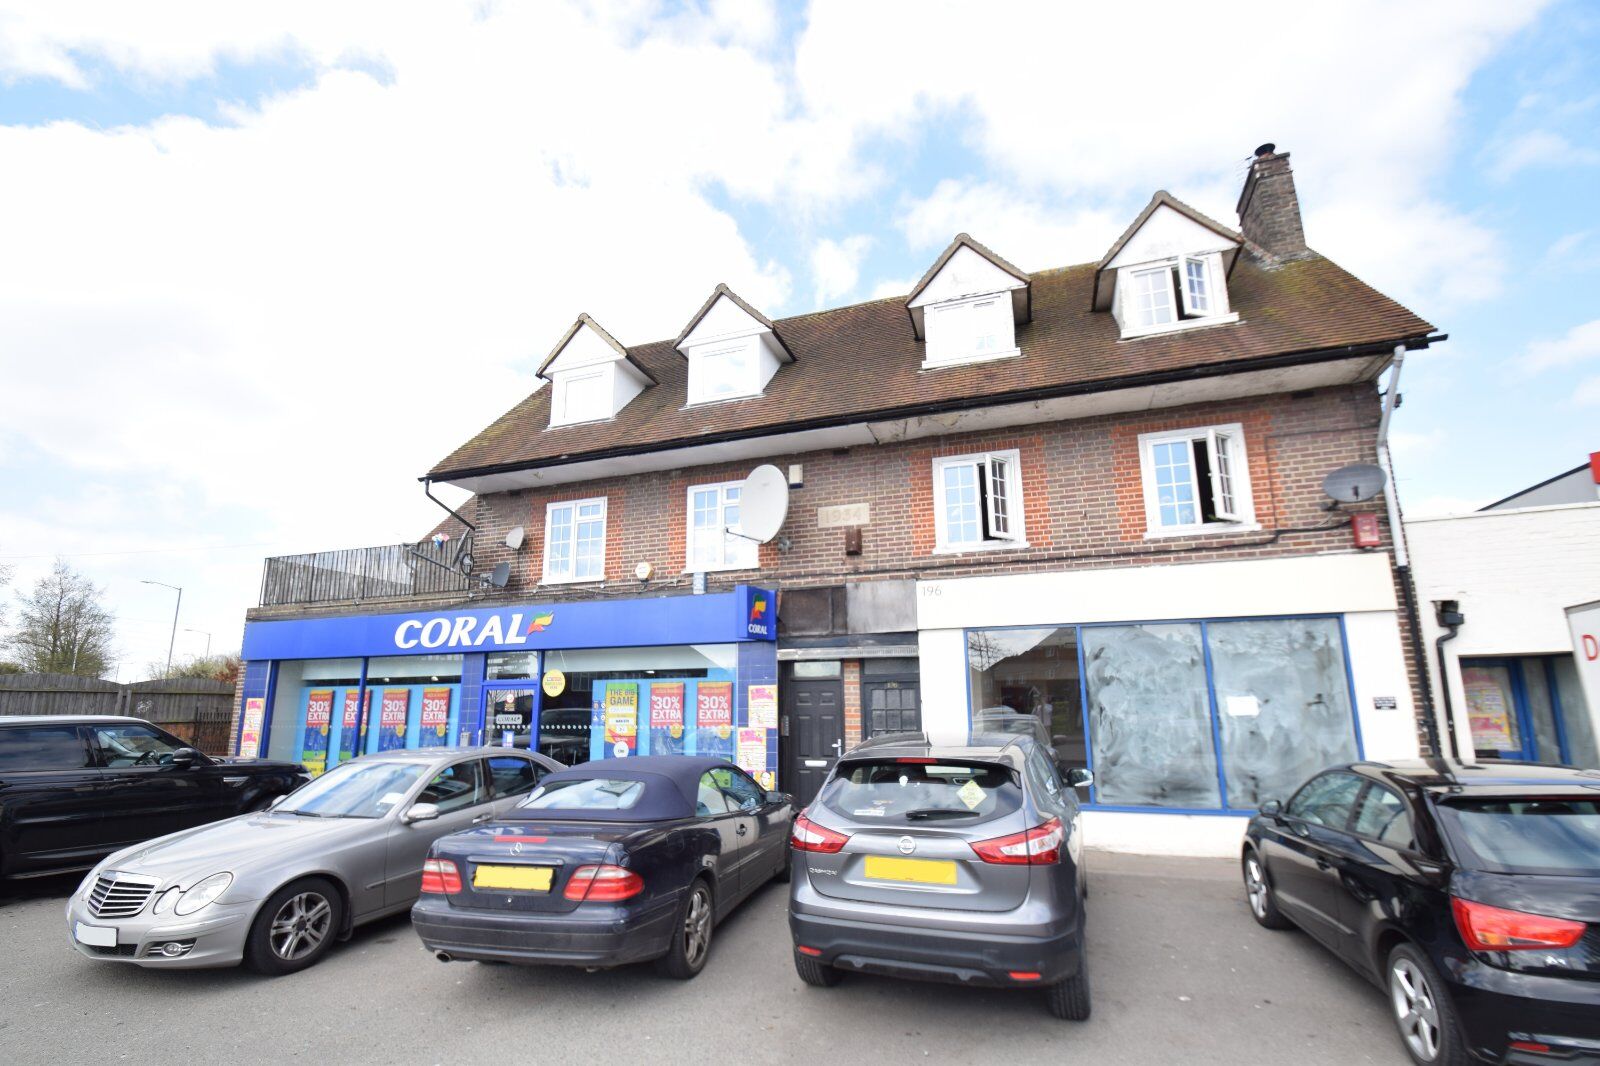 3 bedroom  flat to rent, Available now Cressex Road, High Wycombe, HP12, main image